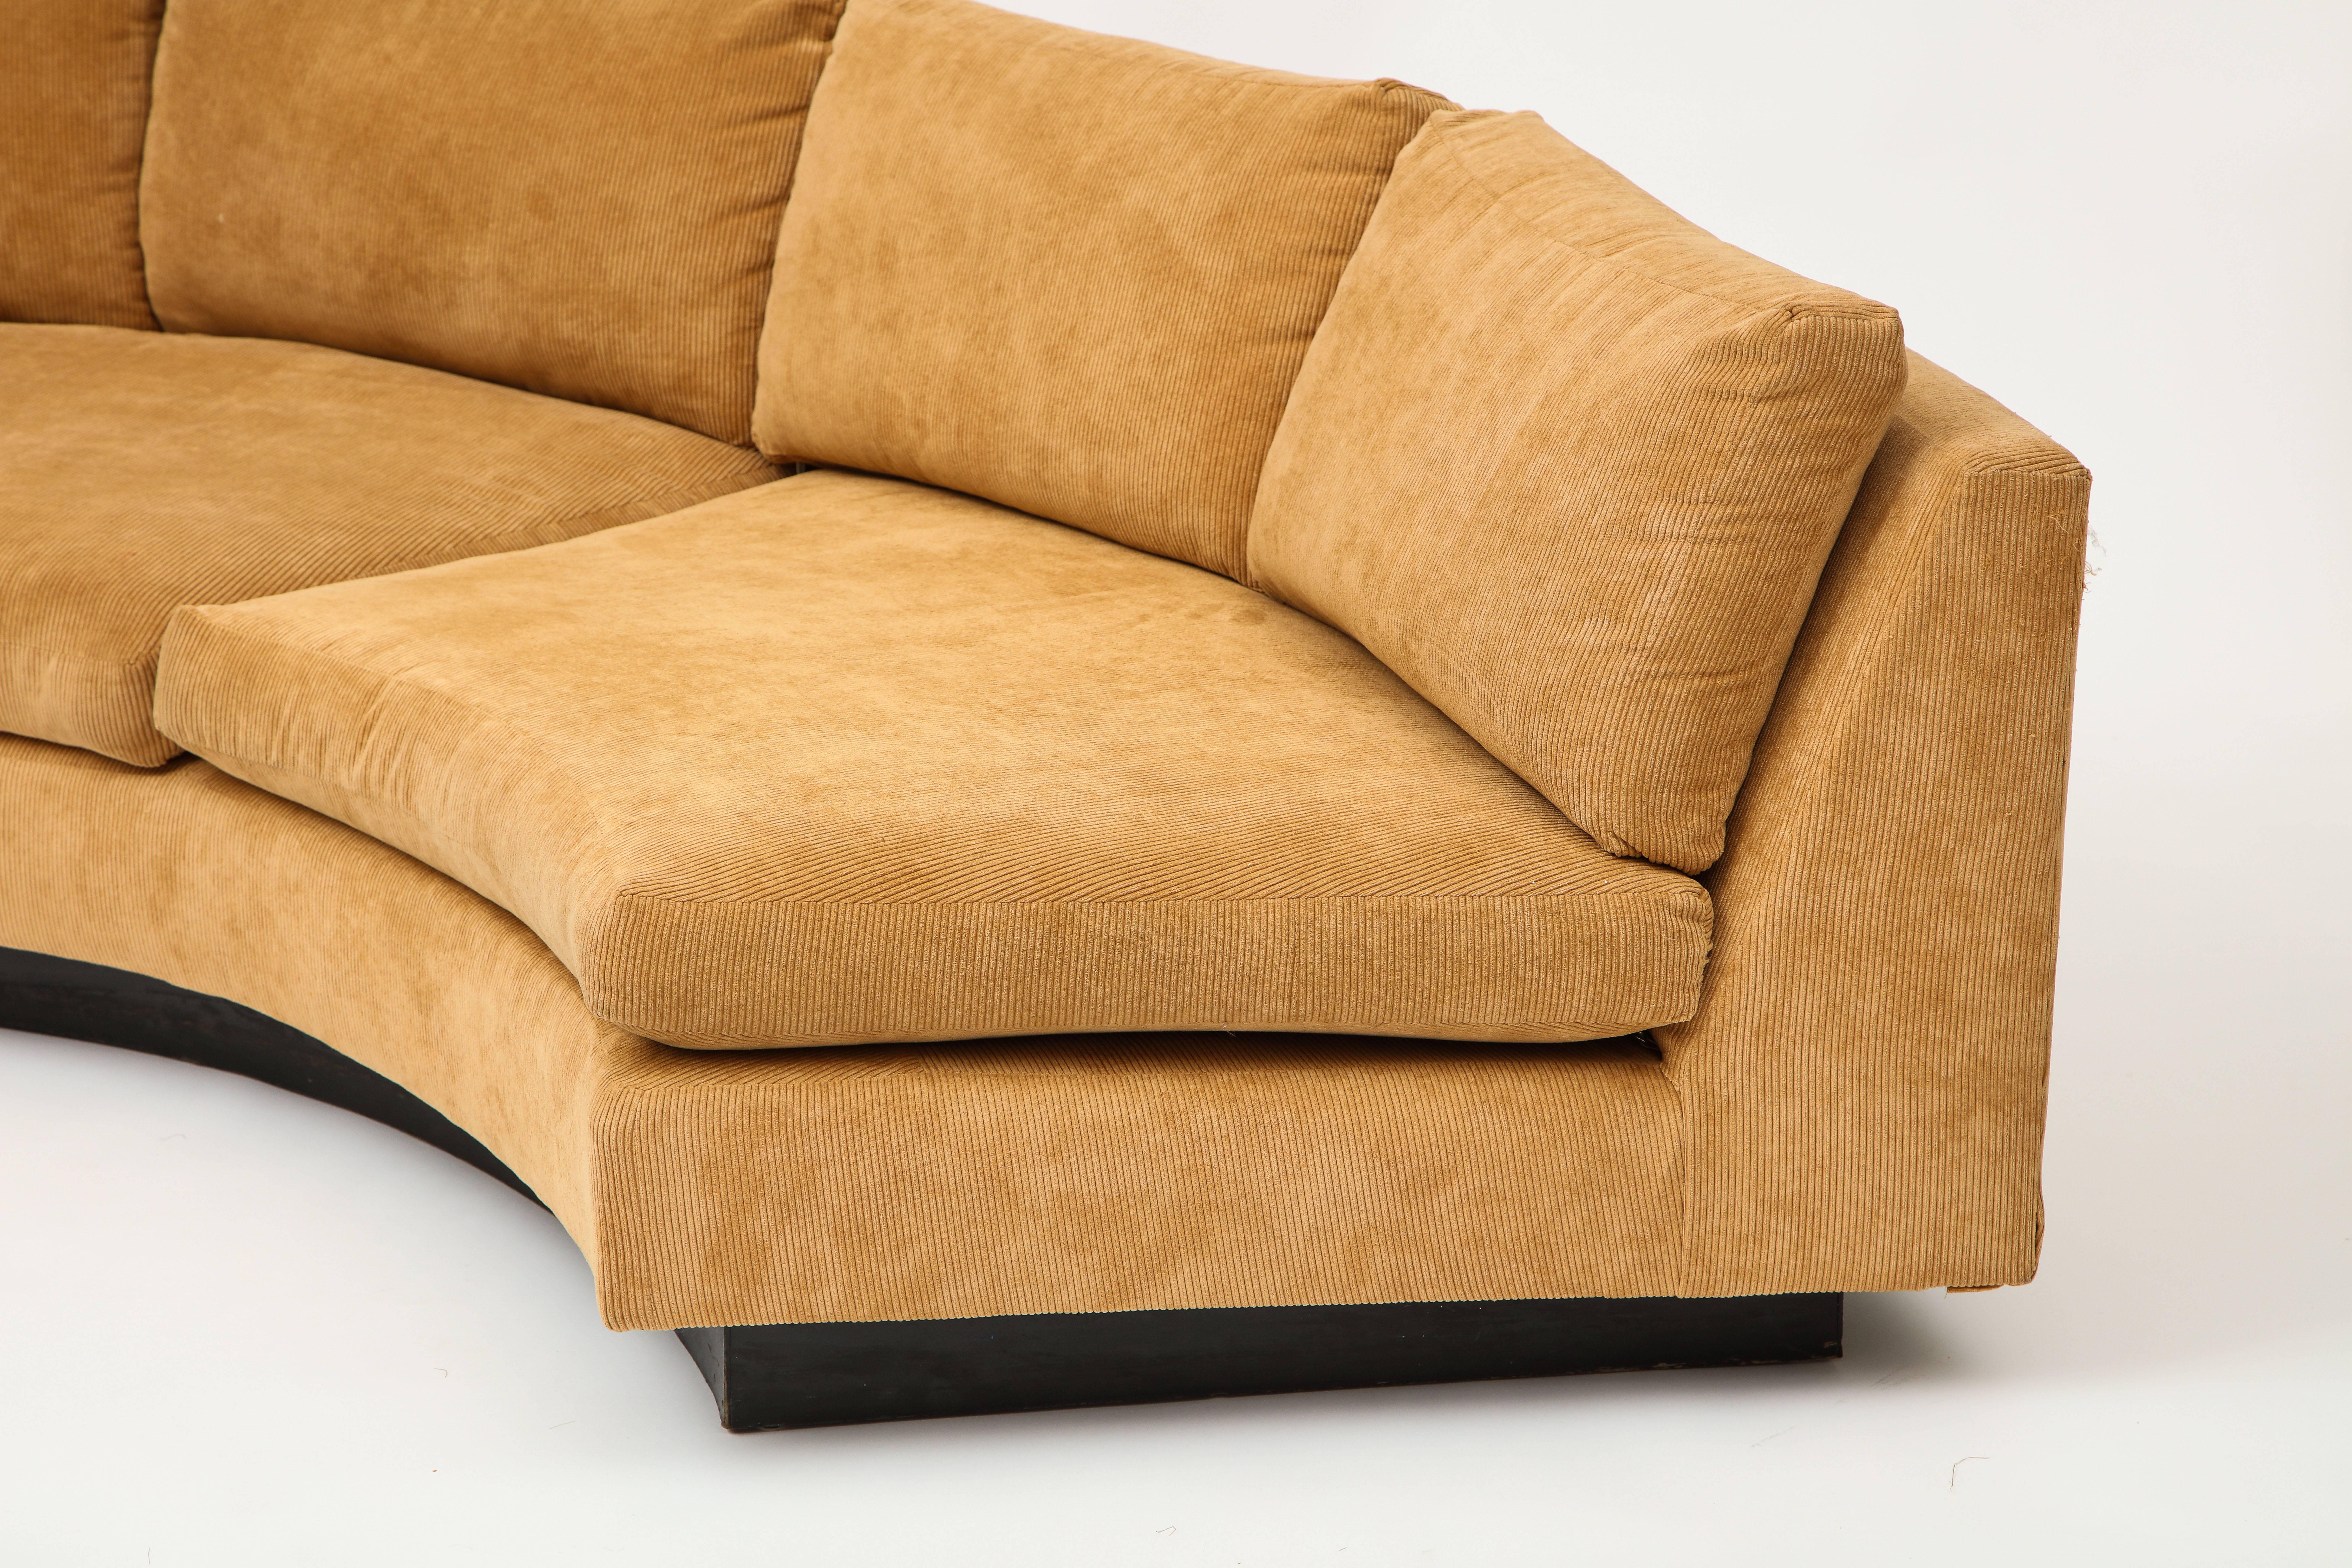 Milo Baughman semi circular two-piece sofa caramel corduroy upholstery, 1980s

Awesome sofa set. Two parts that can either be put together to create a semi circle, or put opposite one another to create a cohesive area.
Beautiful corduroy